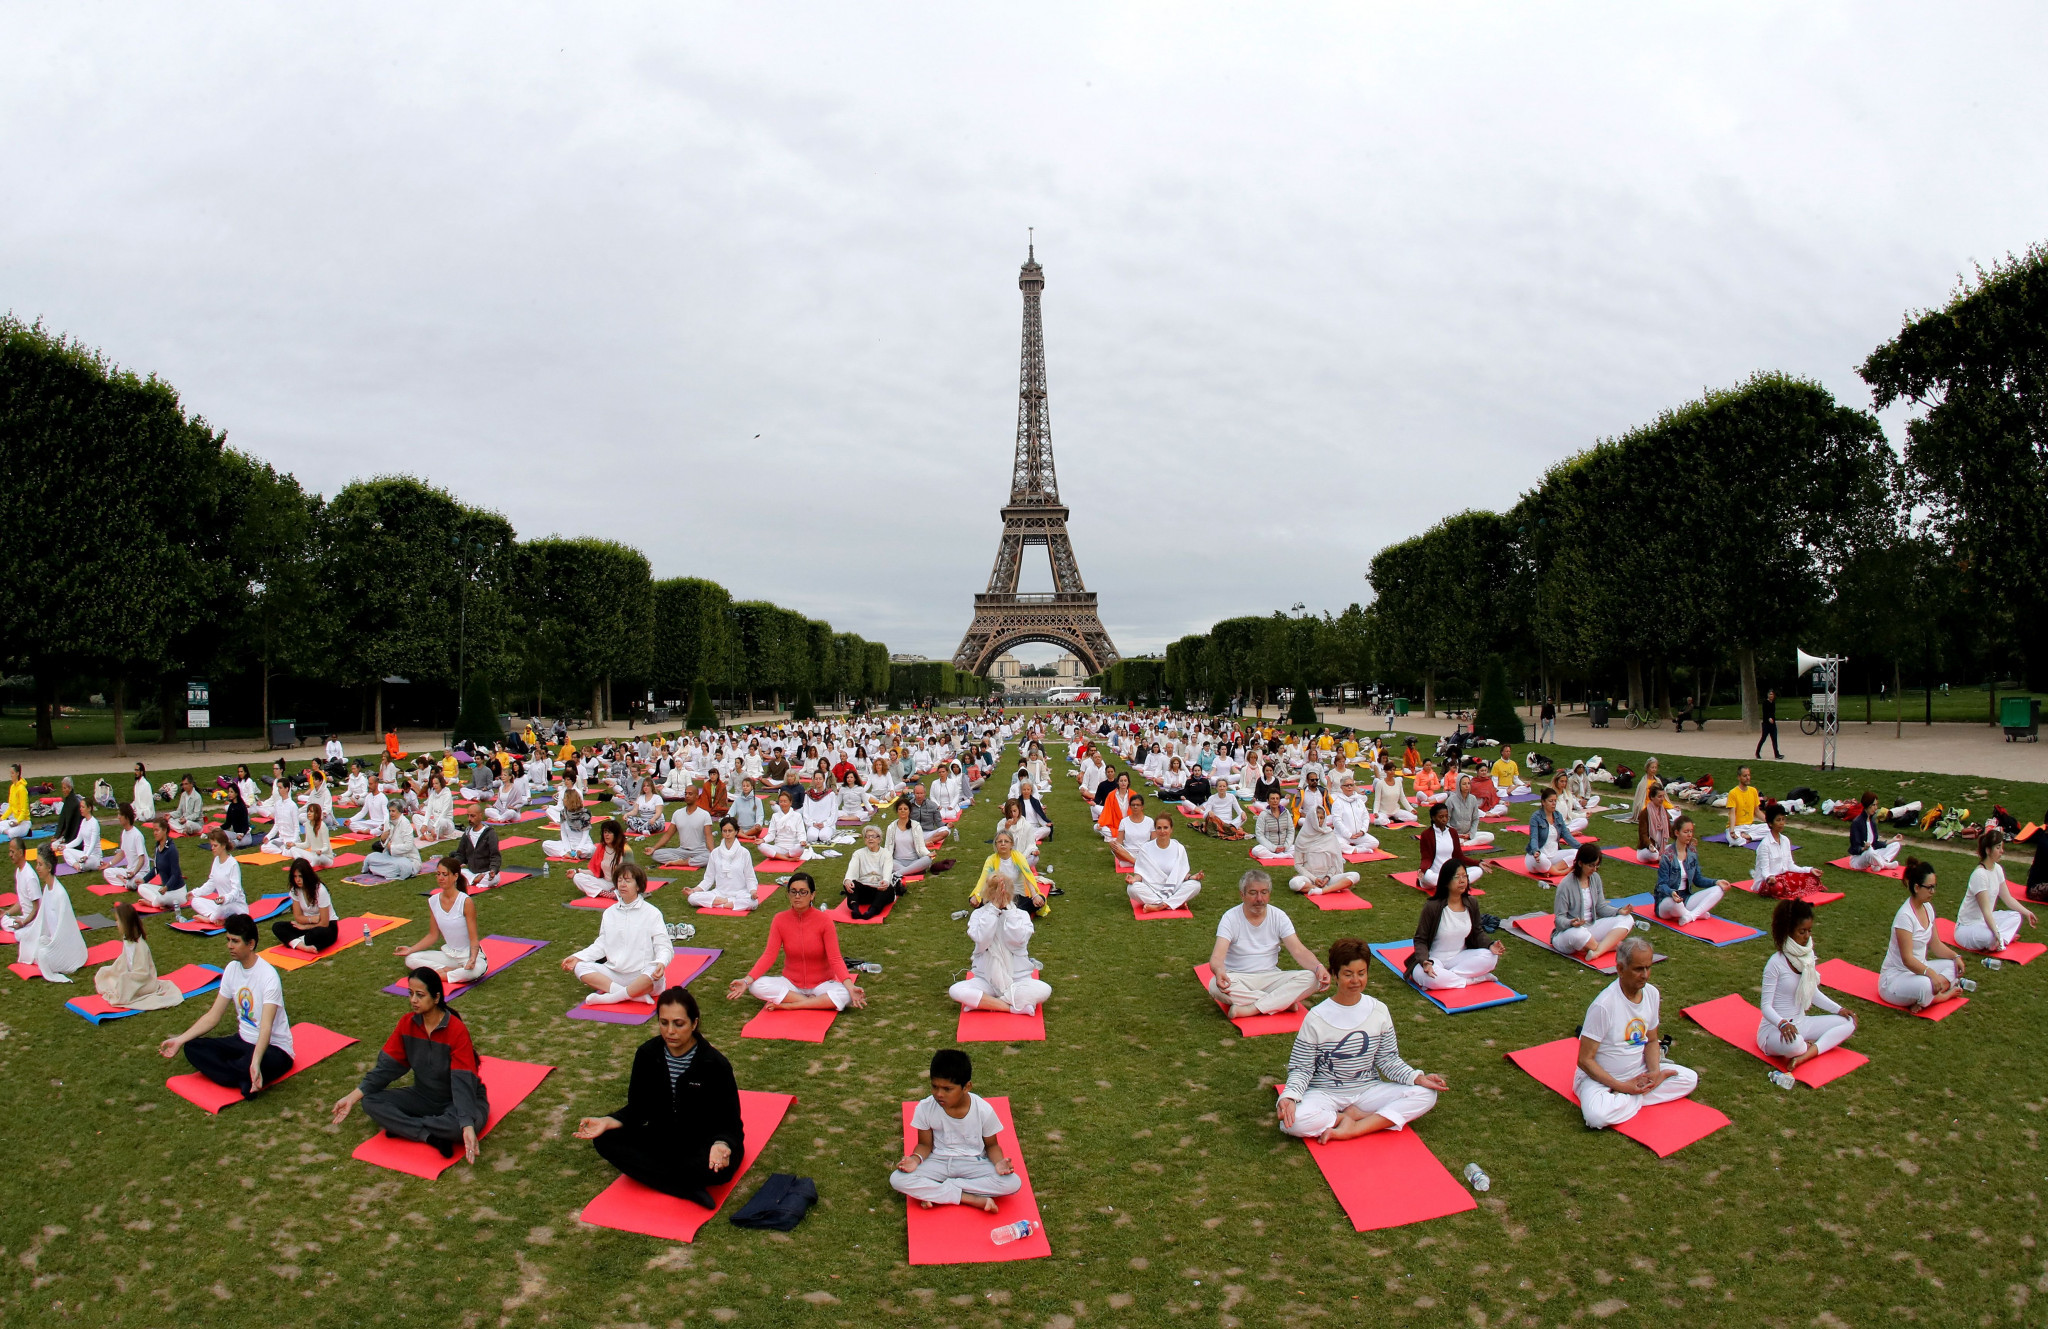 International Yoga Day is celebrated today at the Champs de Mars - earmarked for badminton by Paris 2024 ©Getty Images  